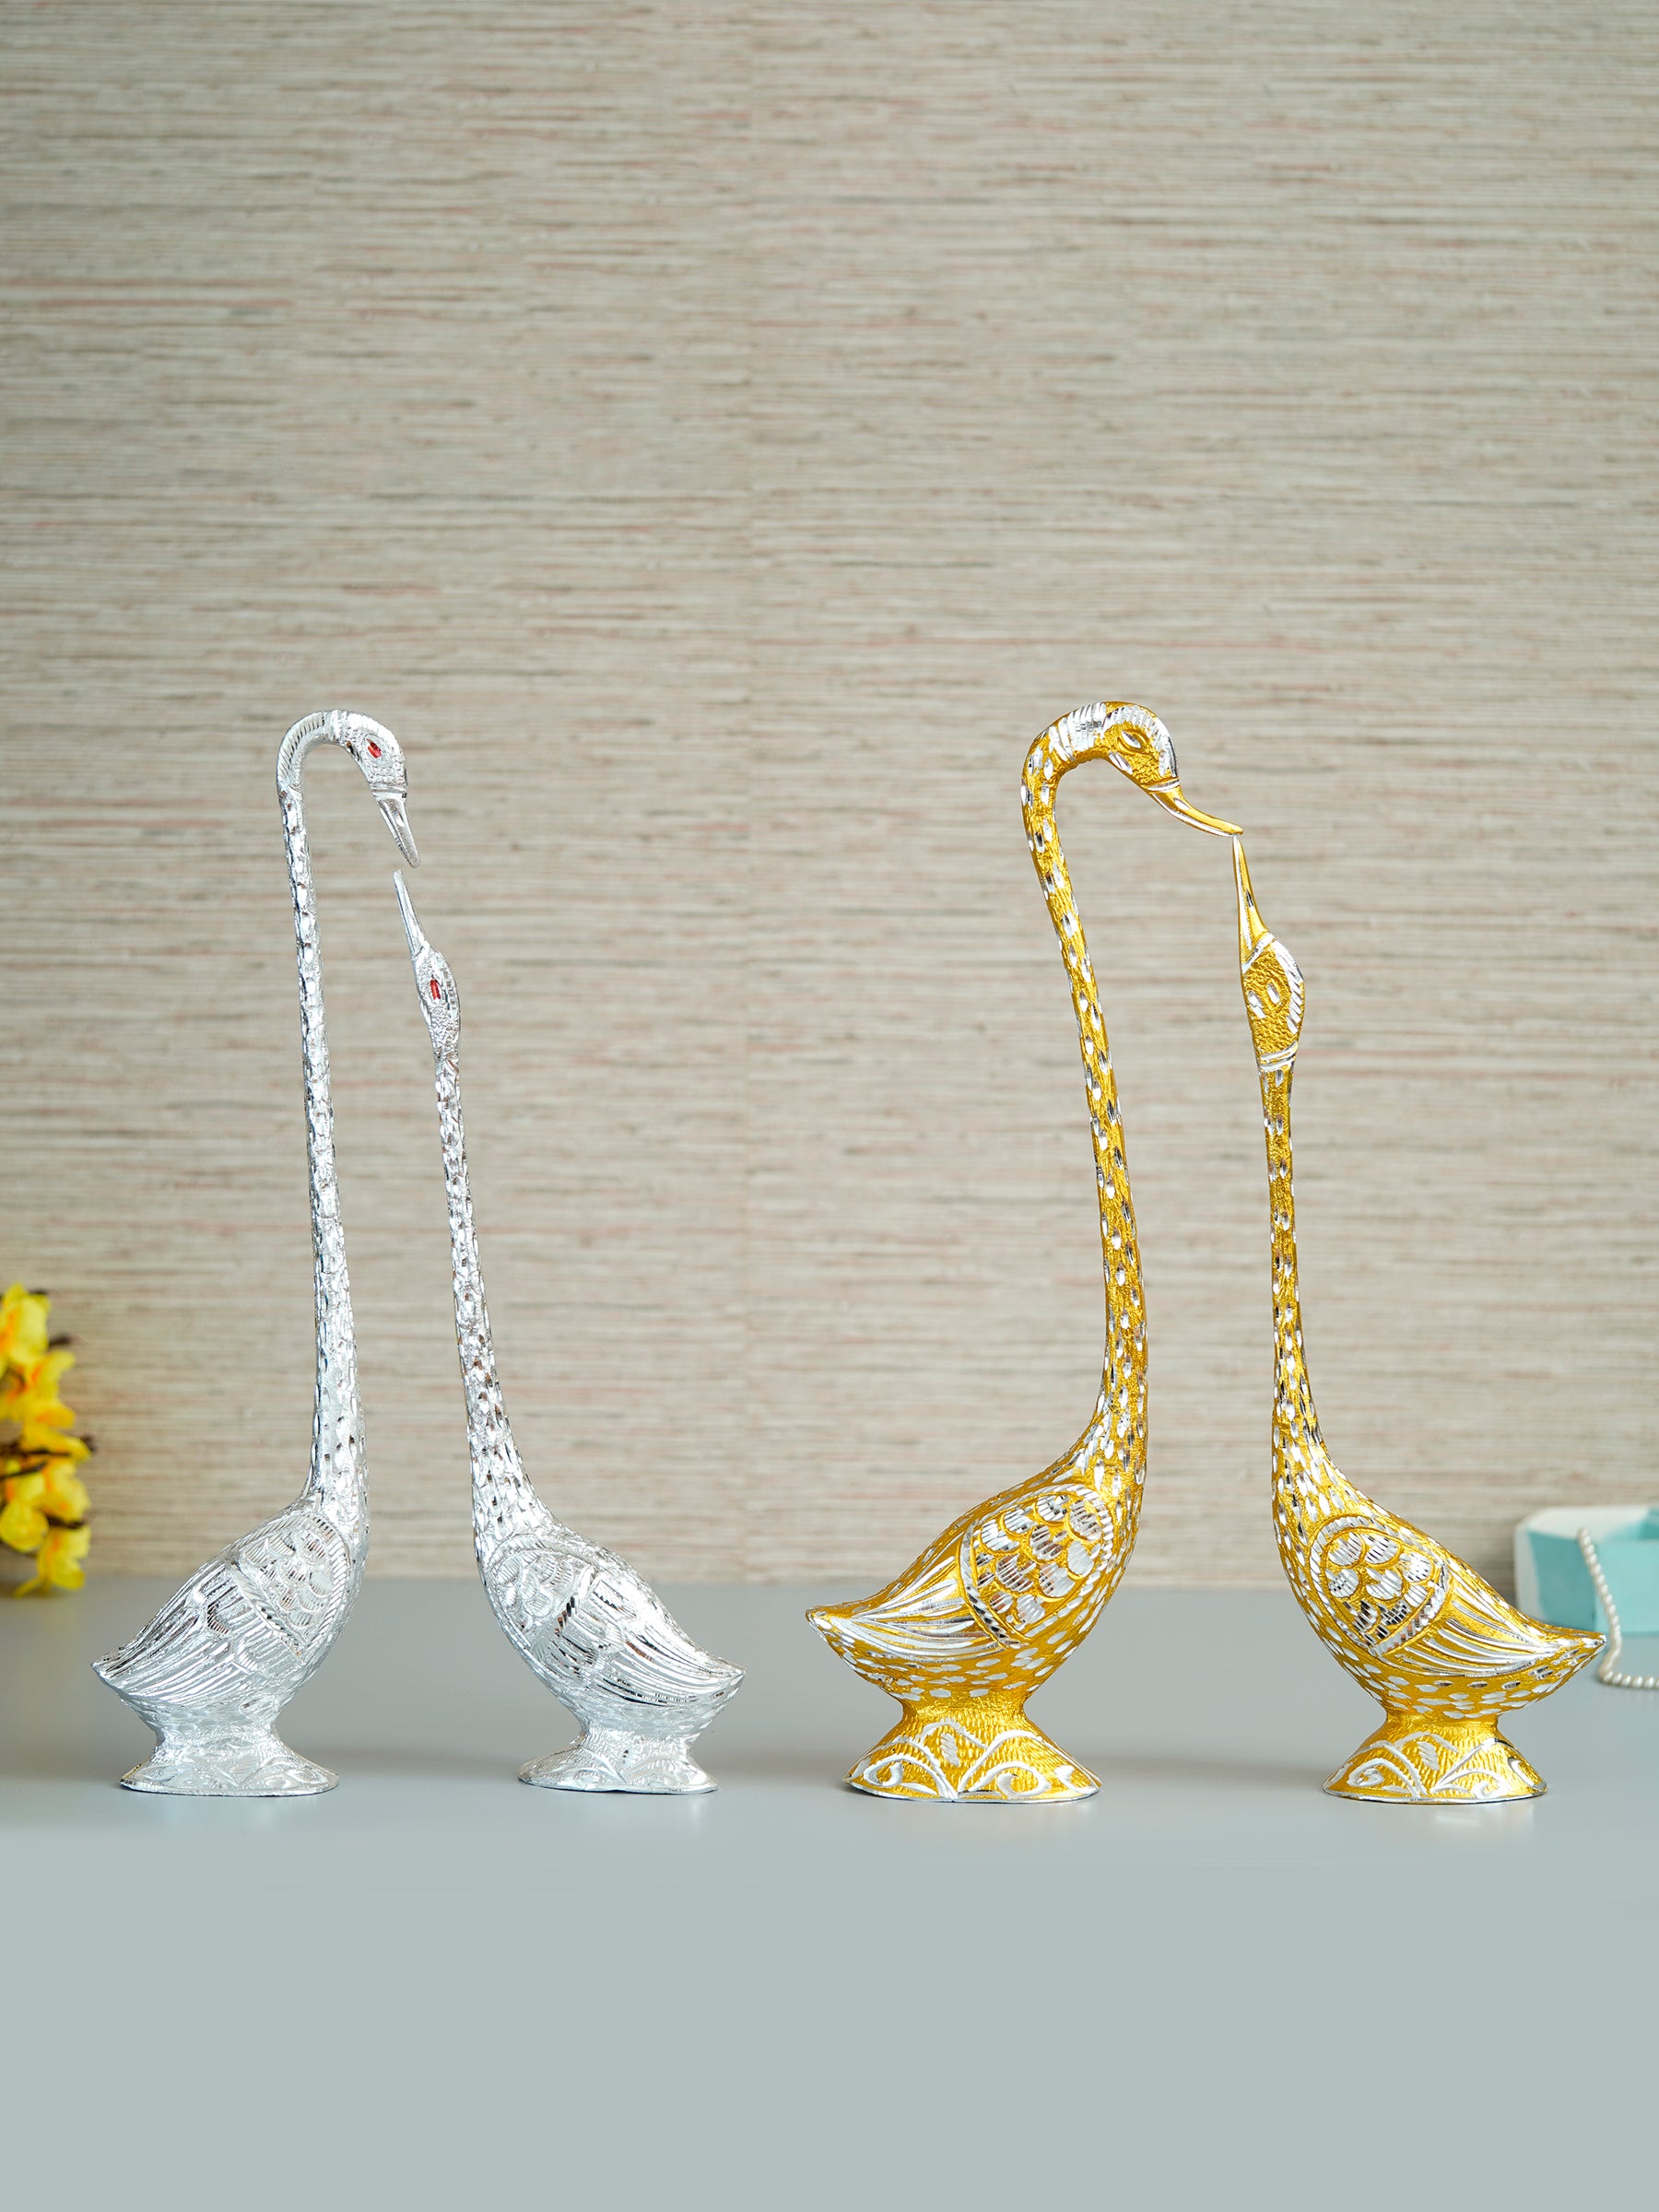 Set Of Two Golden And Silver Kissing Swan Couple Handicrafted Decorative Figurine